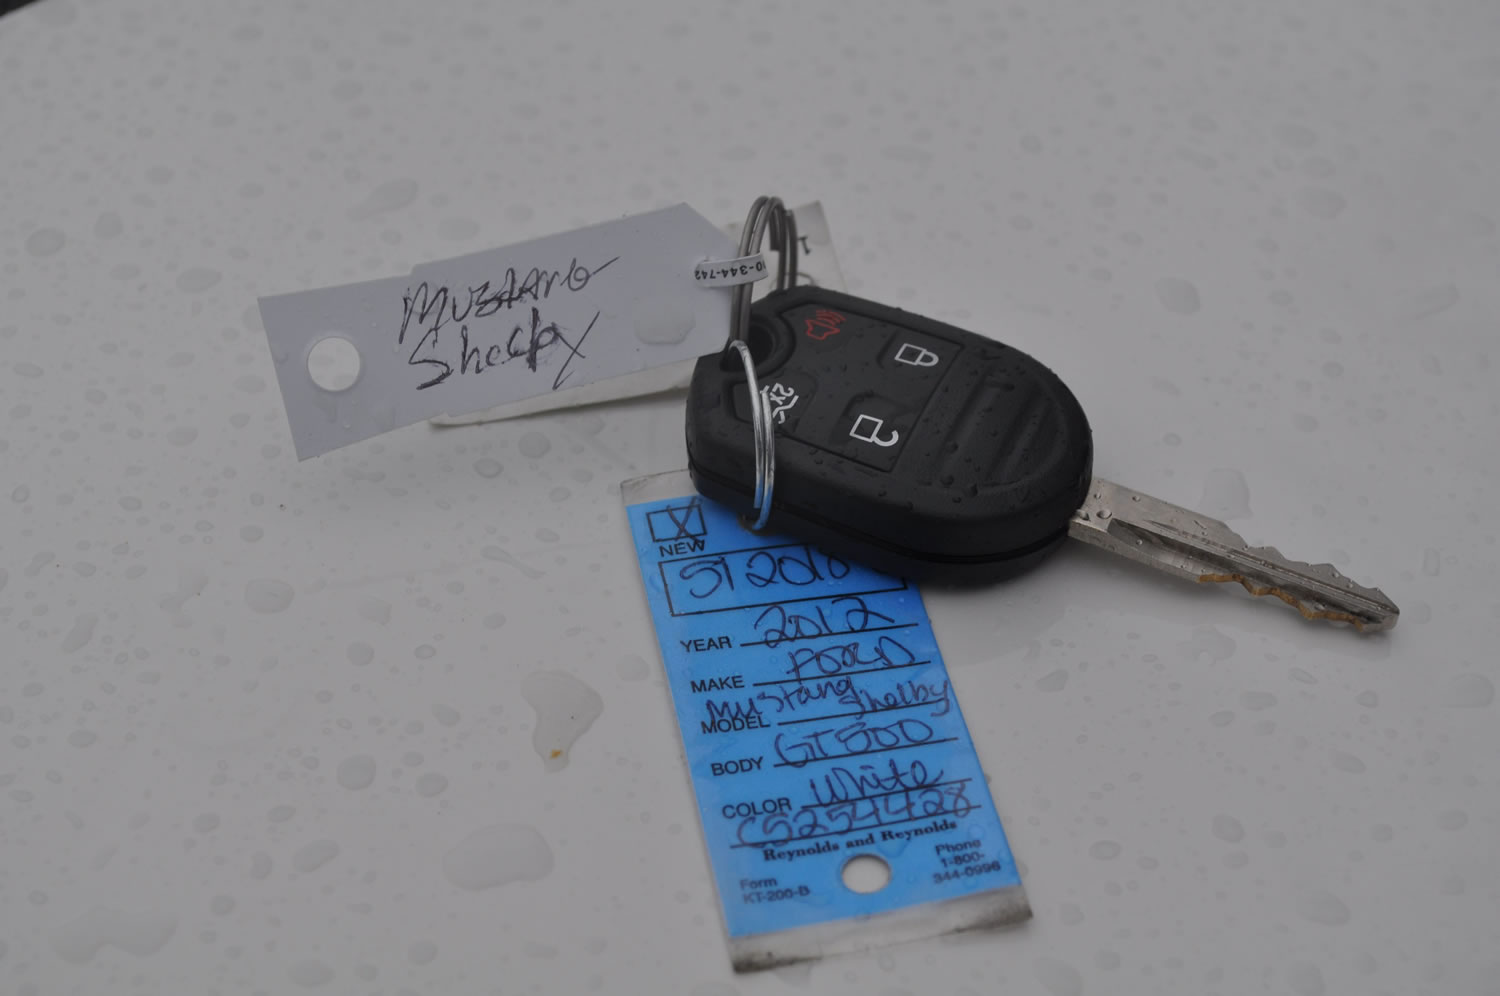 The keys to a 2012 Ford Shelby Mustang are among more than 200 sets of new car keys stolen from a Beaverton, Ore.